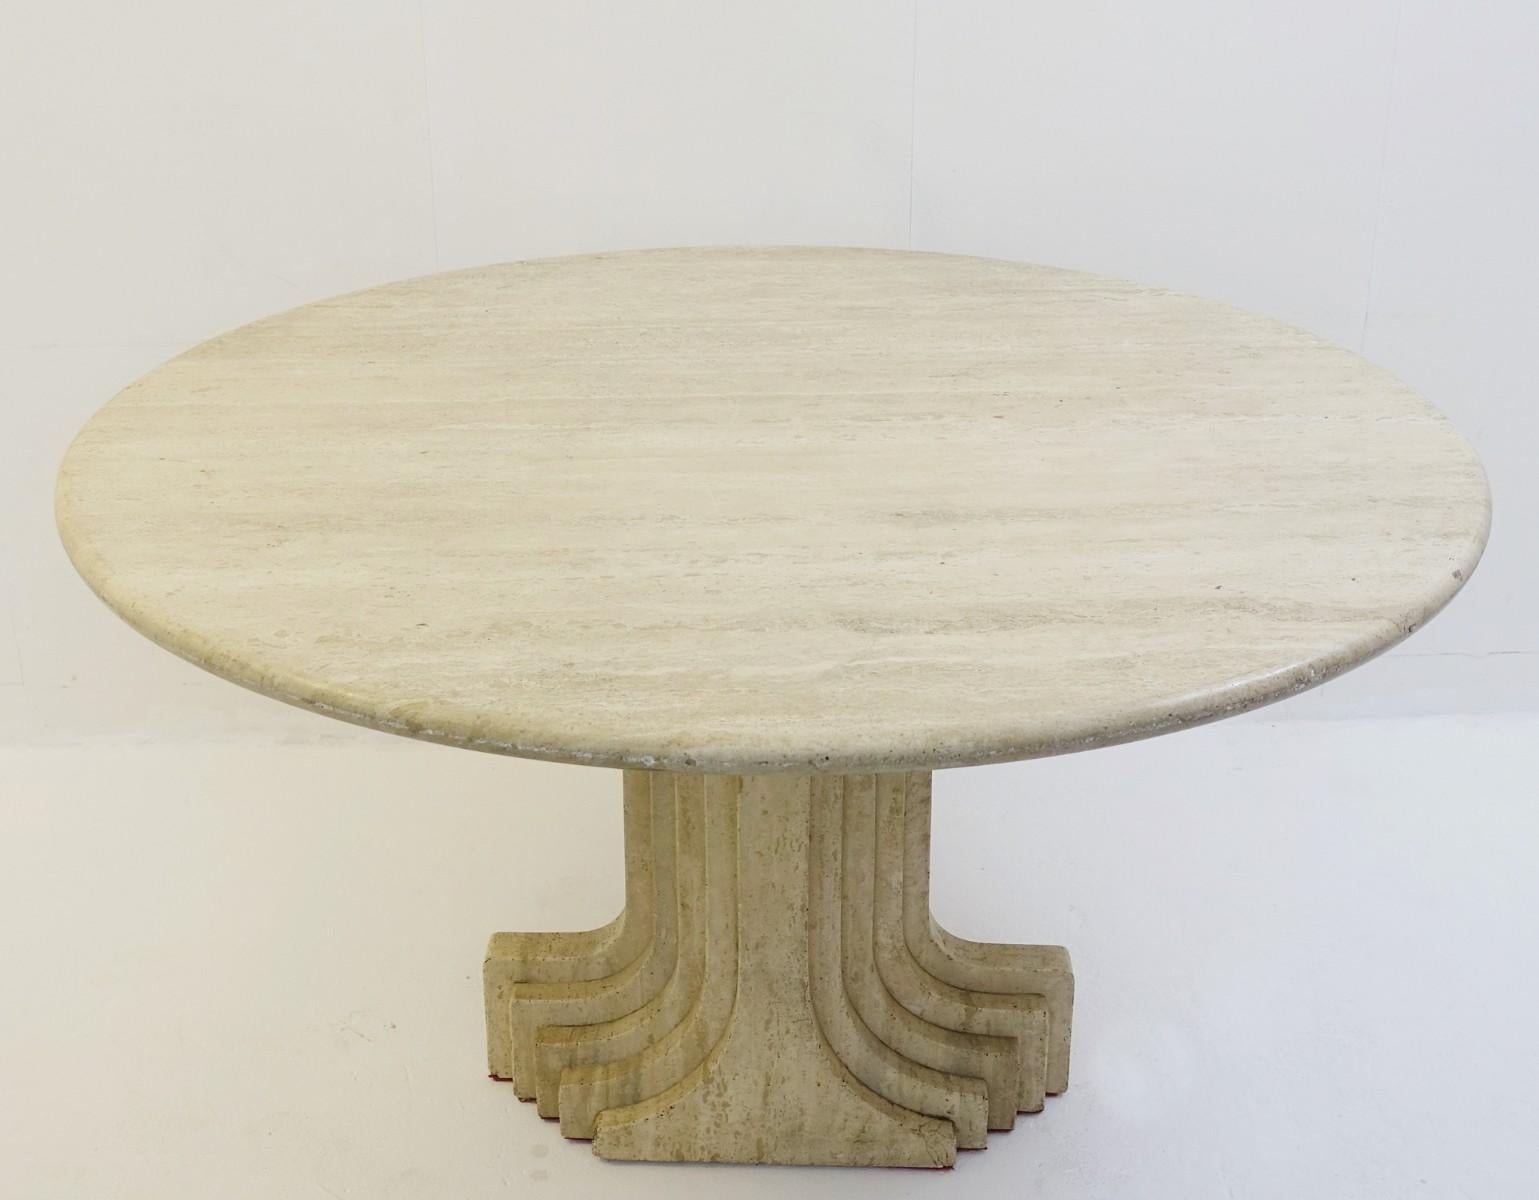 Round dining table by Carlo Scarpa, Italy, 1970s.